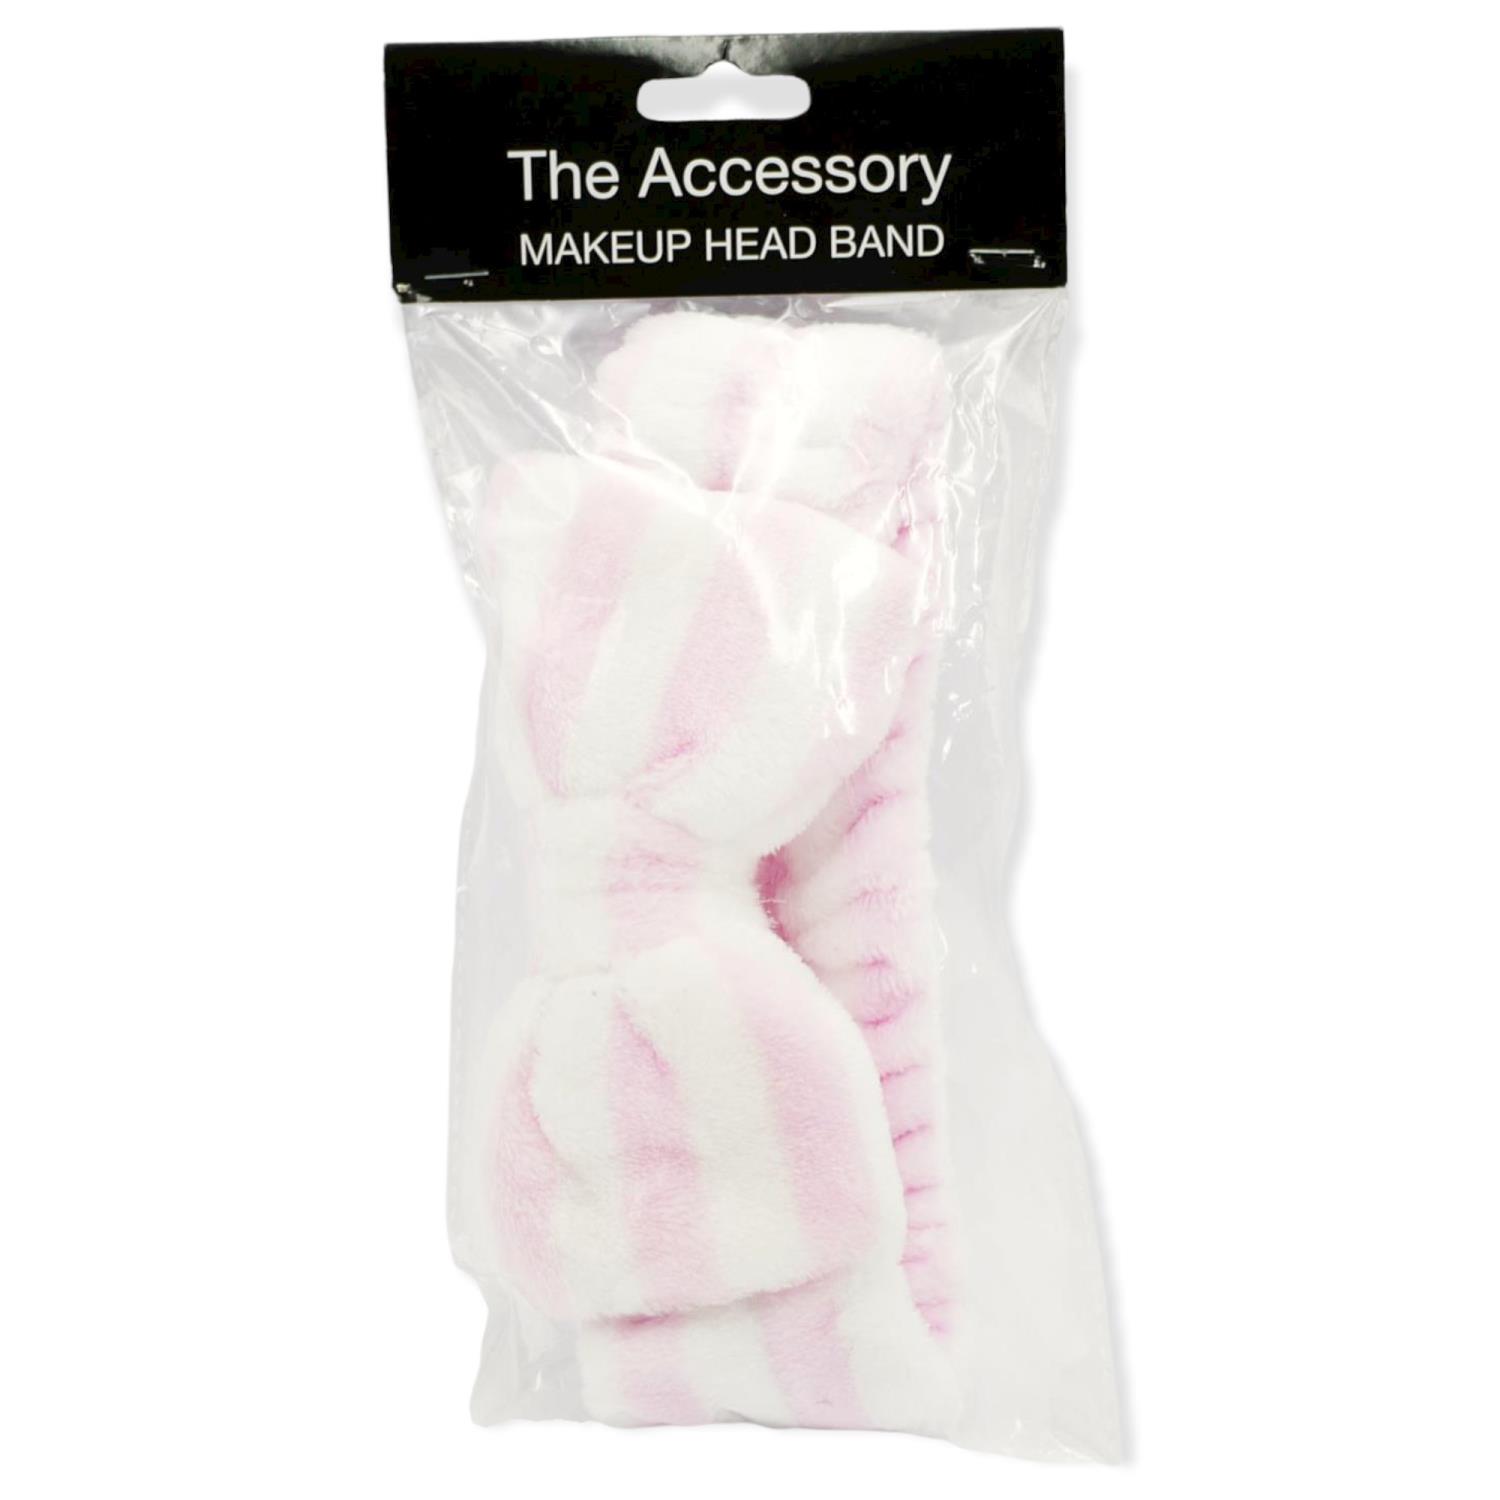 The Accessory Makeup Head Band